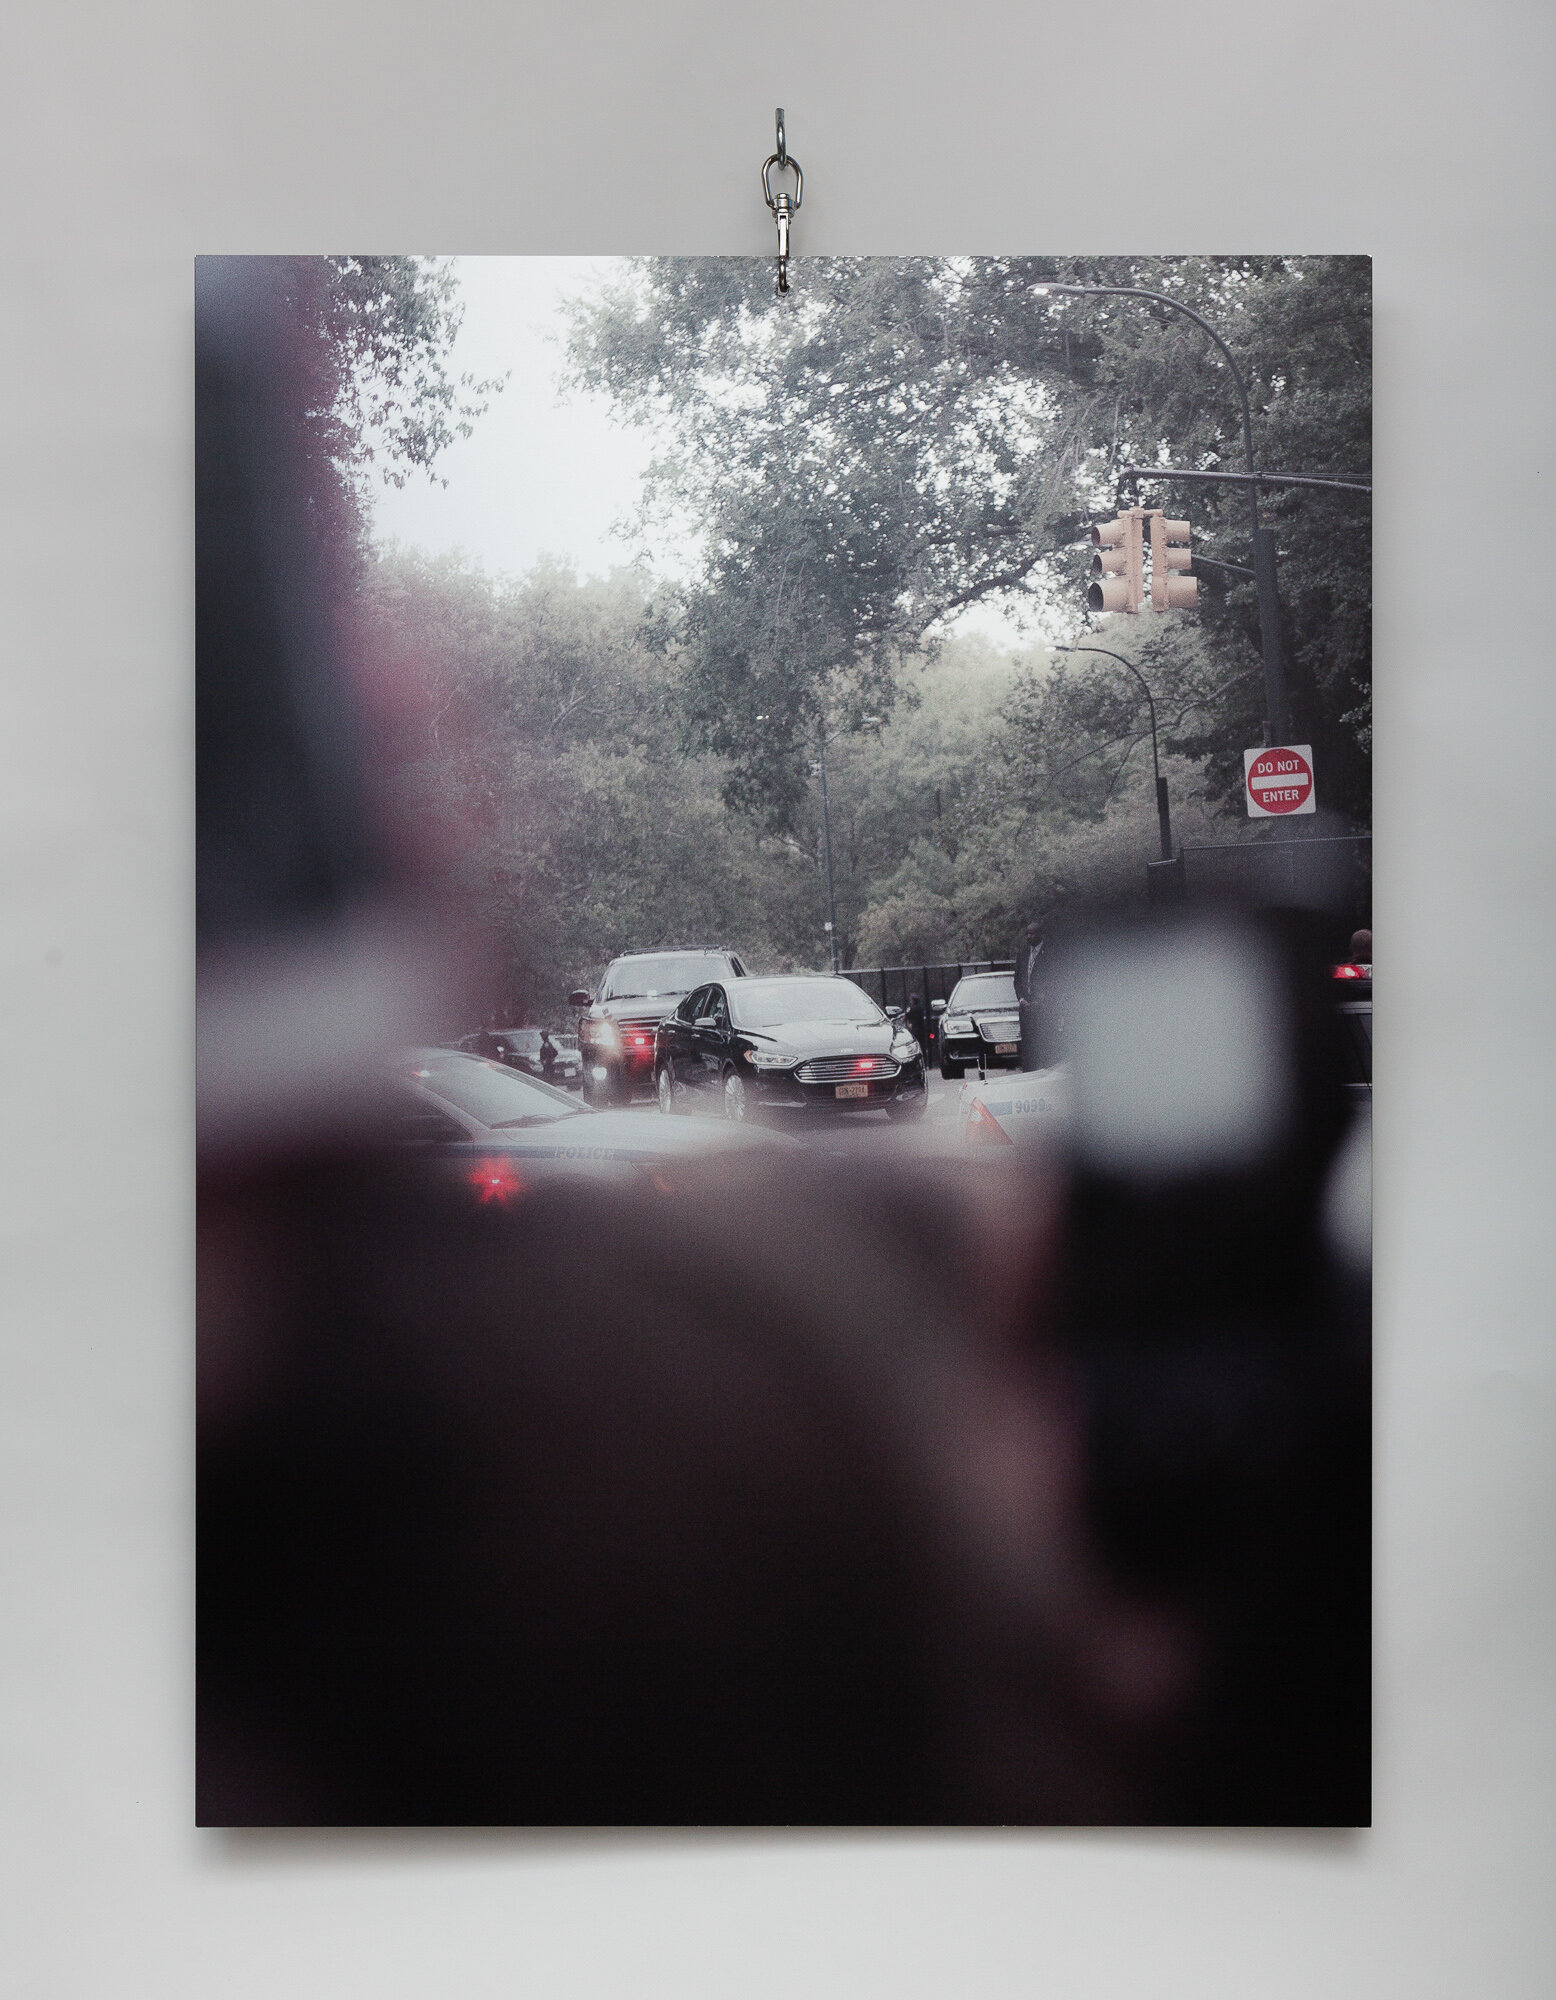   Central Park South (Panel 5, Side B) , 2015/19, Double-sided print on aluminum, 40 x 30 inches 